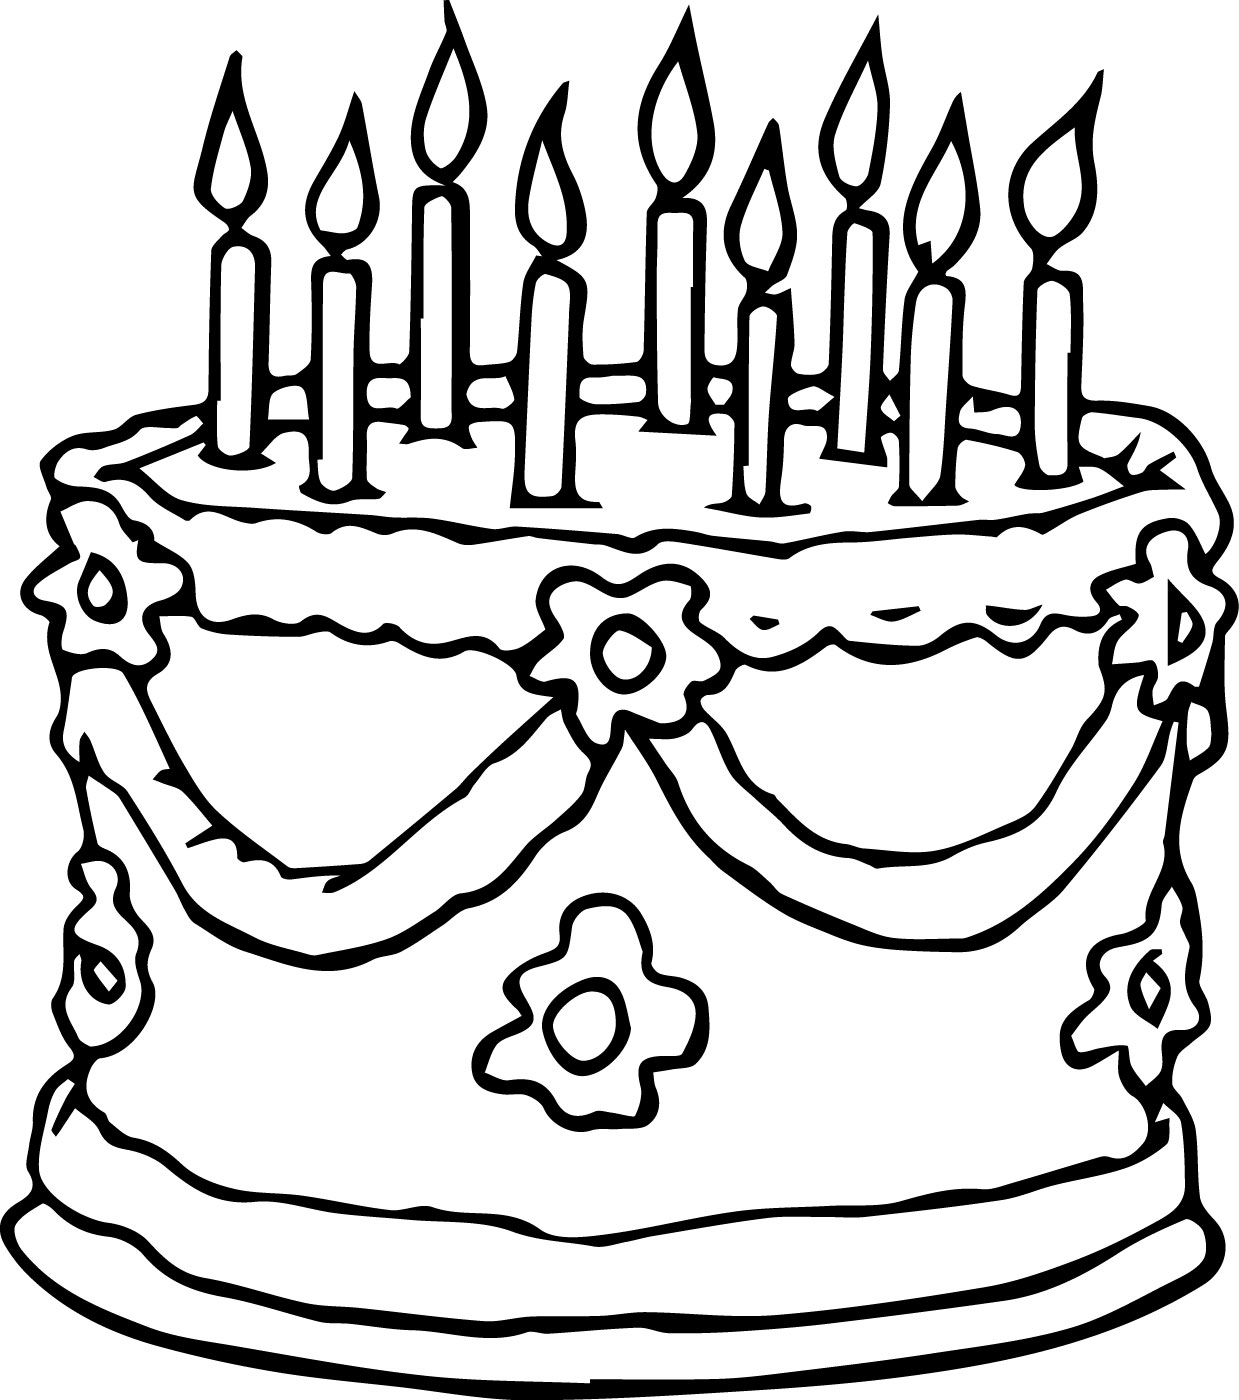 Birthday Cake Coloring Page at GetColorings.com | Free printable